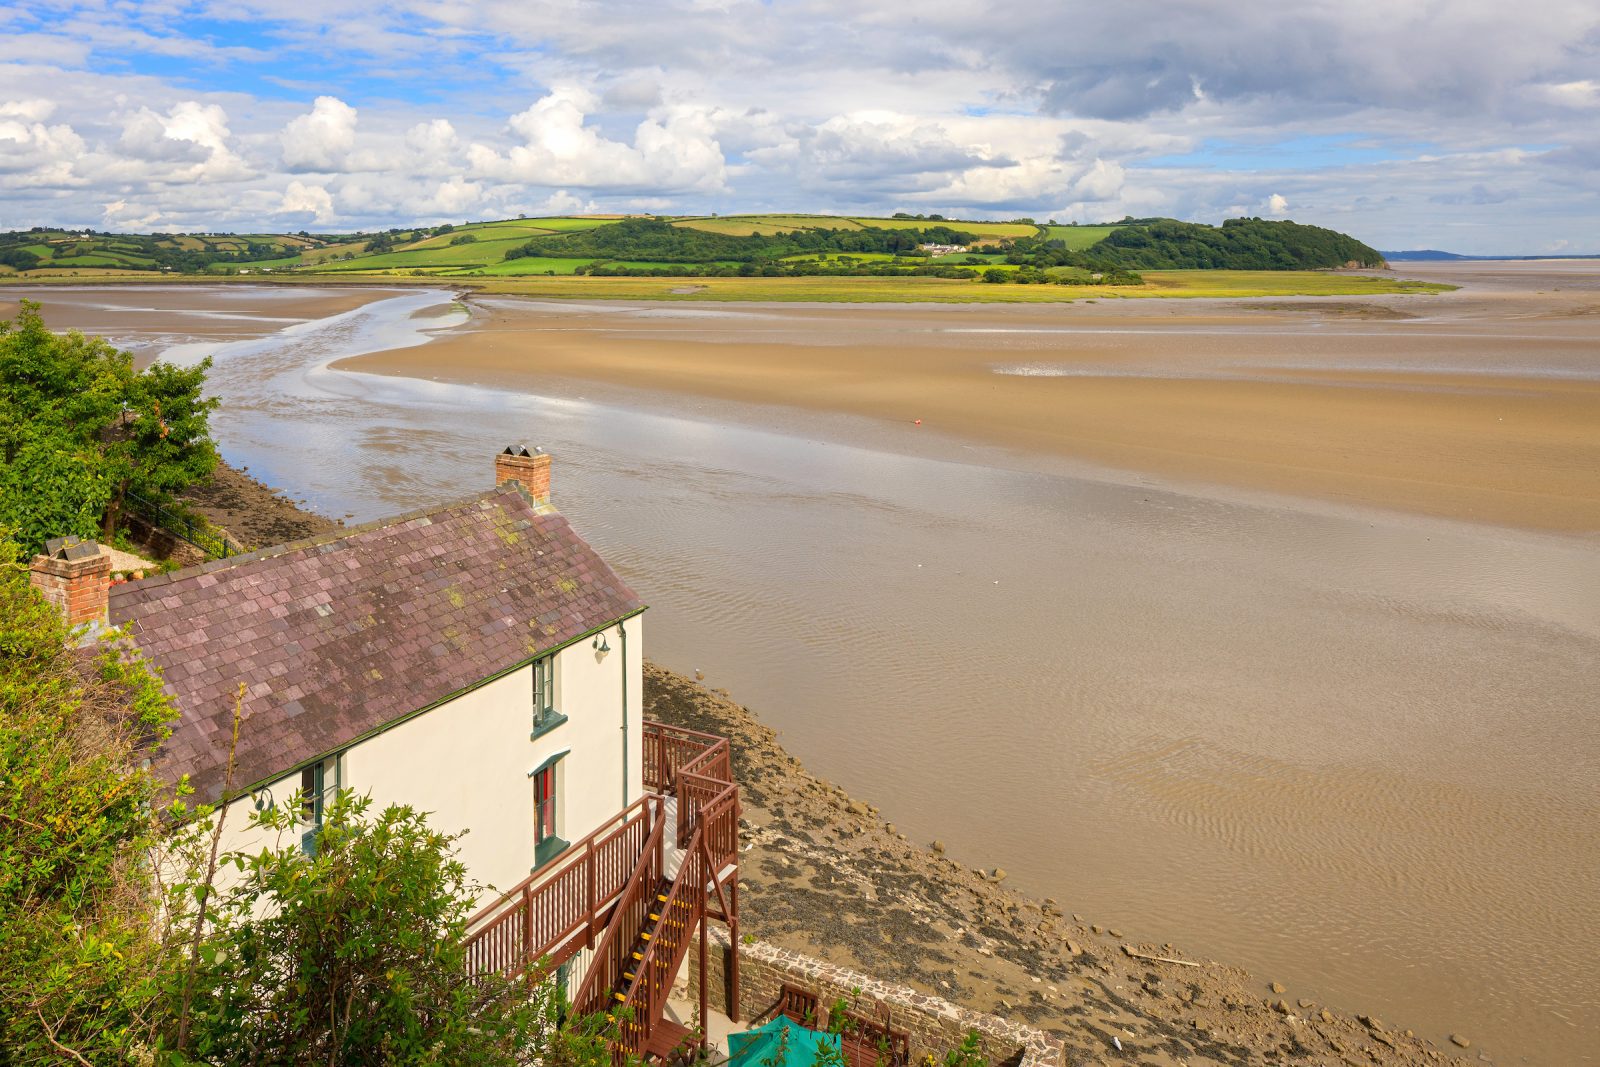 Wales Self Drive Vacations - Laugharne, Dylan Thomas' Boathouse